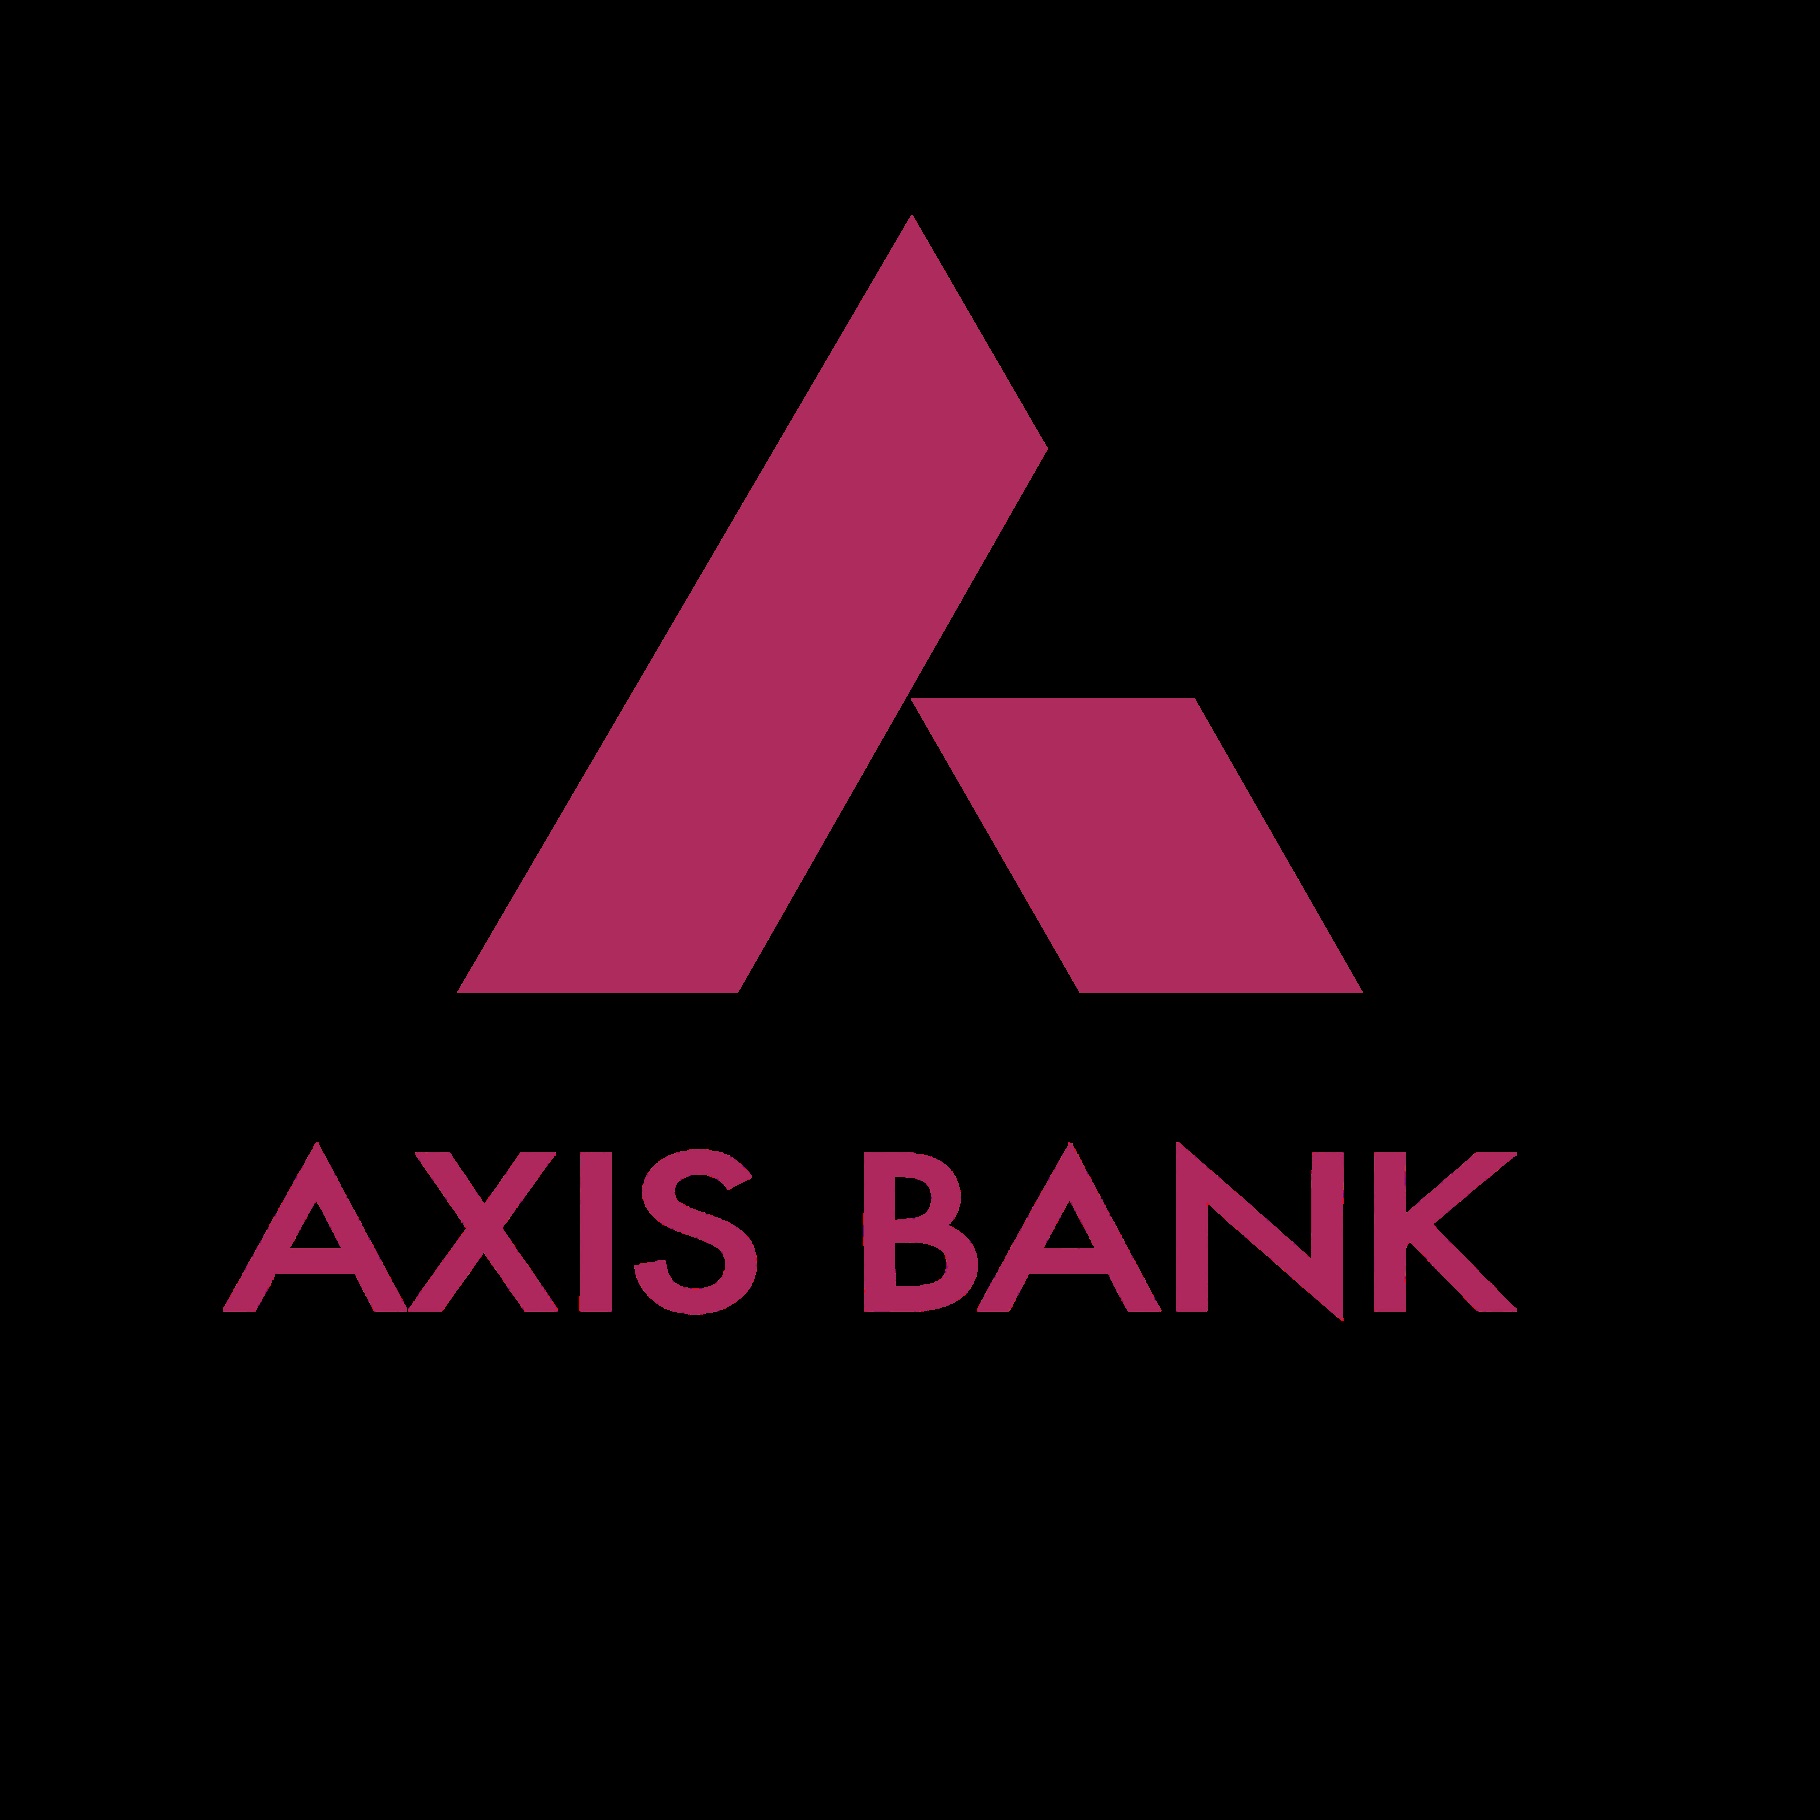 Axis Bank stock gains ahead of Q4 results, lender set to swing back to profit